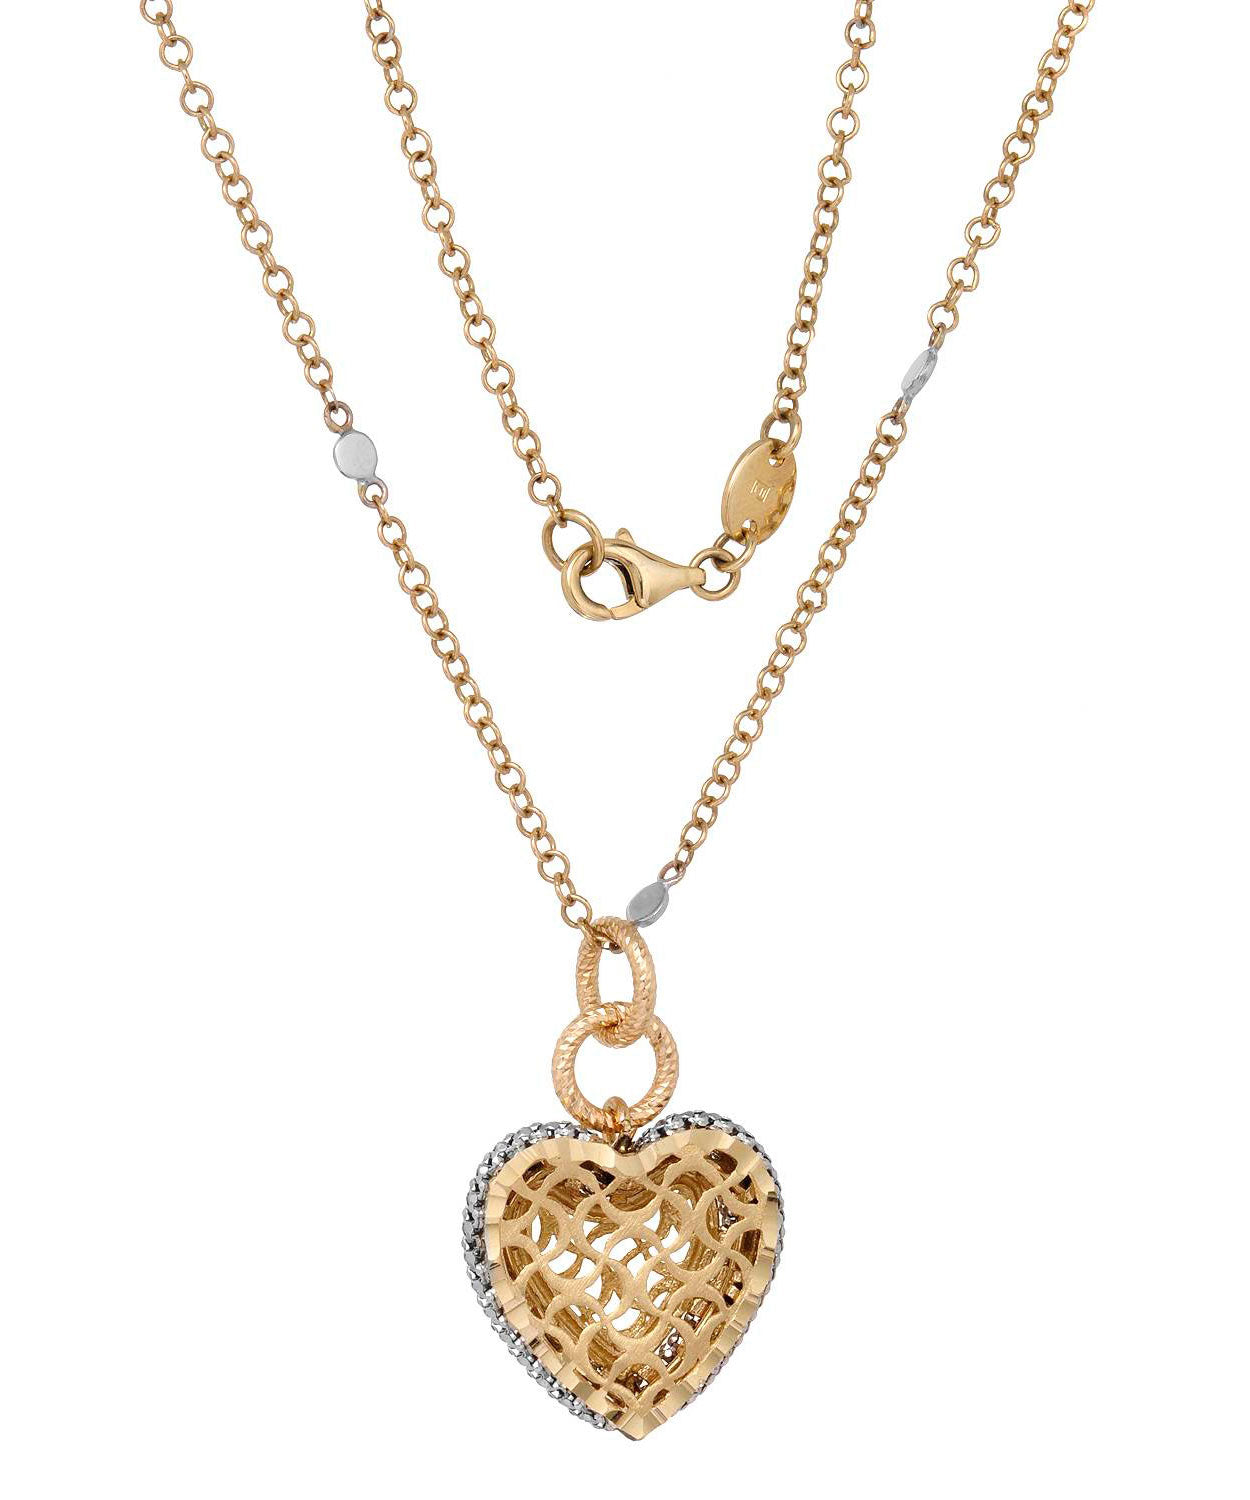 14k Two-Tone Gold Heart Pendant With Chain - Made in Italy View 2